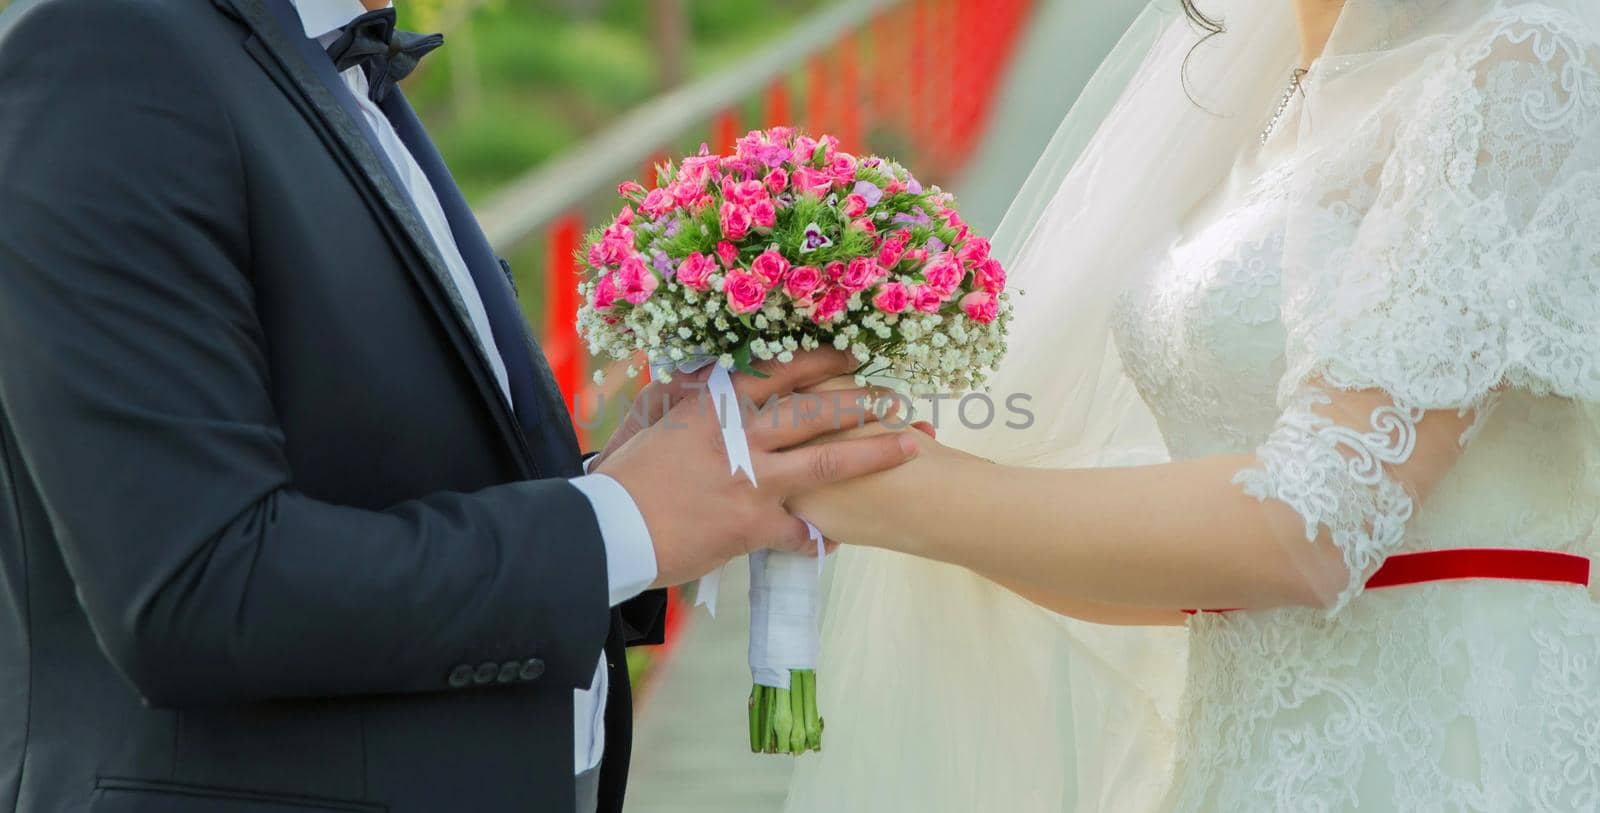 They held the pink flower bouquet in their hands . hands folded behind their back, hold a beautiful little wedding bouquet of roses . The newlyweds hold in their hands a wedding bouquet between each other. by Adil_Celebiyev_Stok_Photo